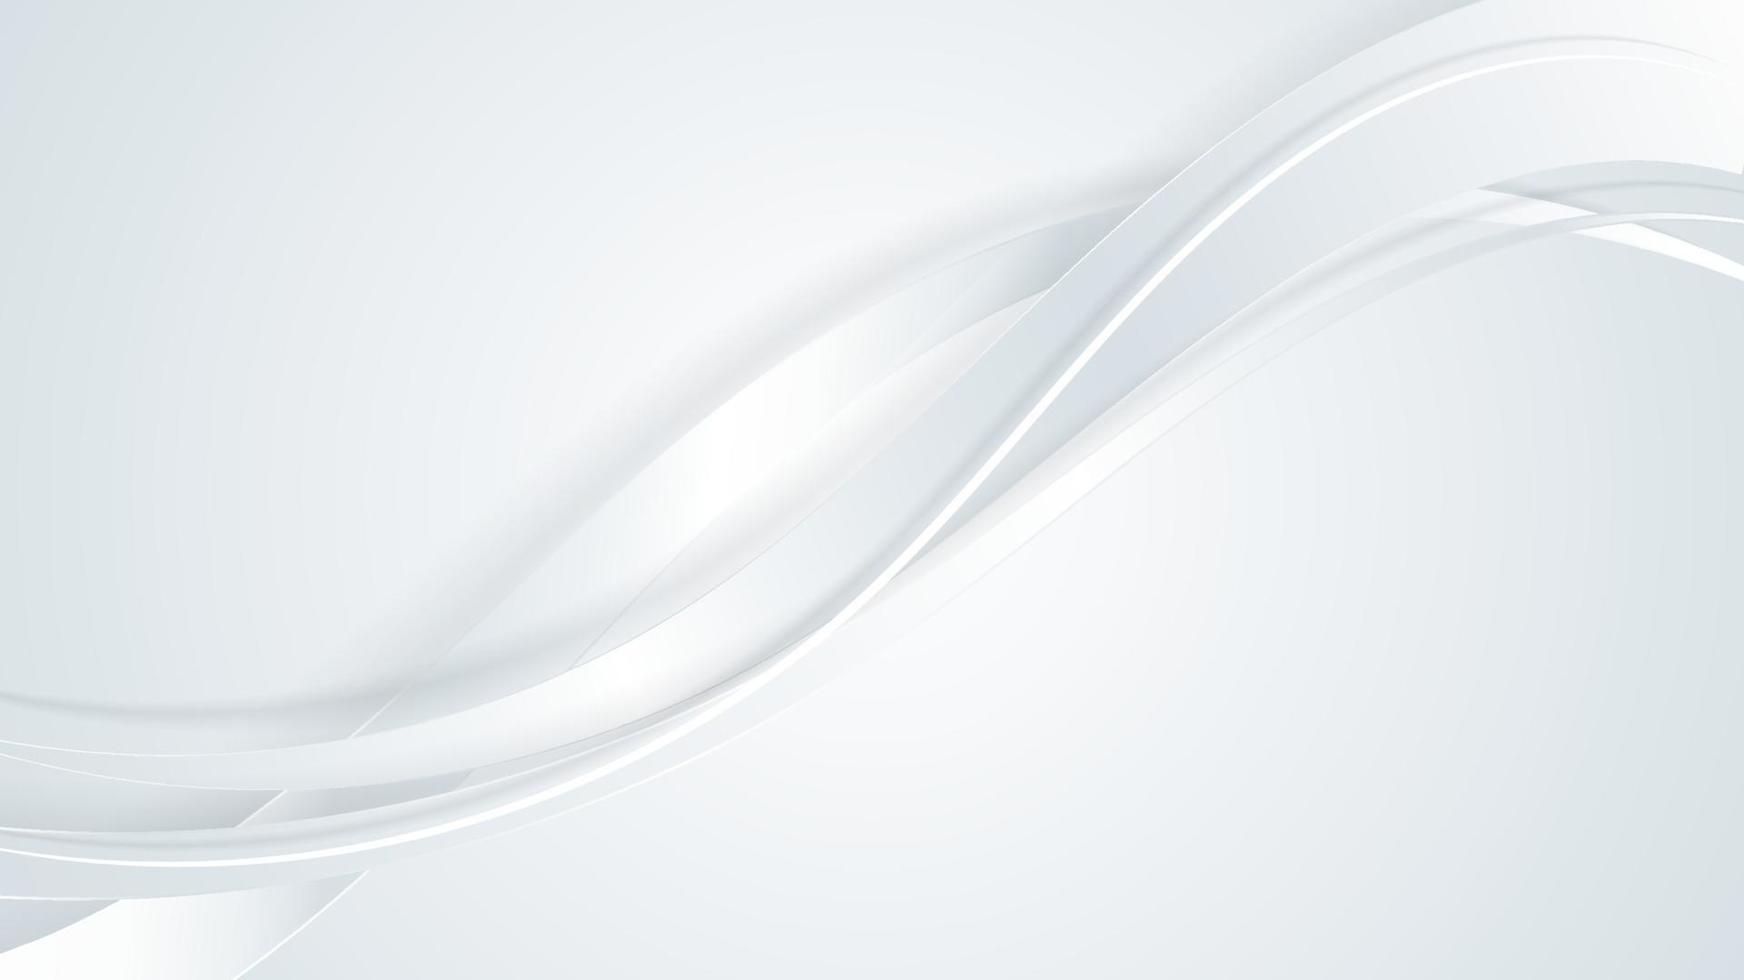 Abstract luxury 3D white and gray ribbon wave curved lines on clean background vector